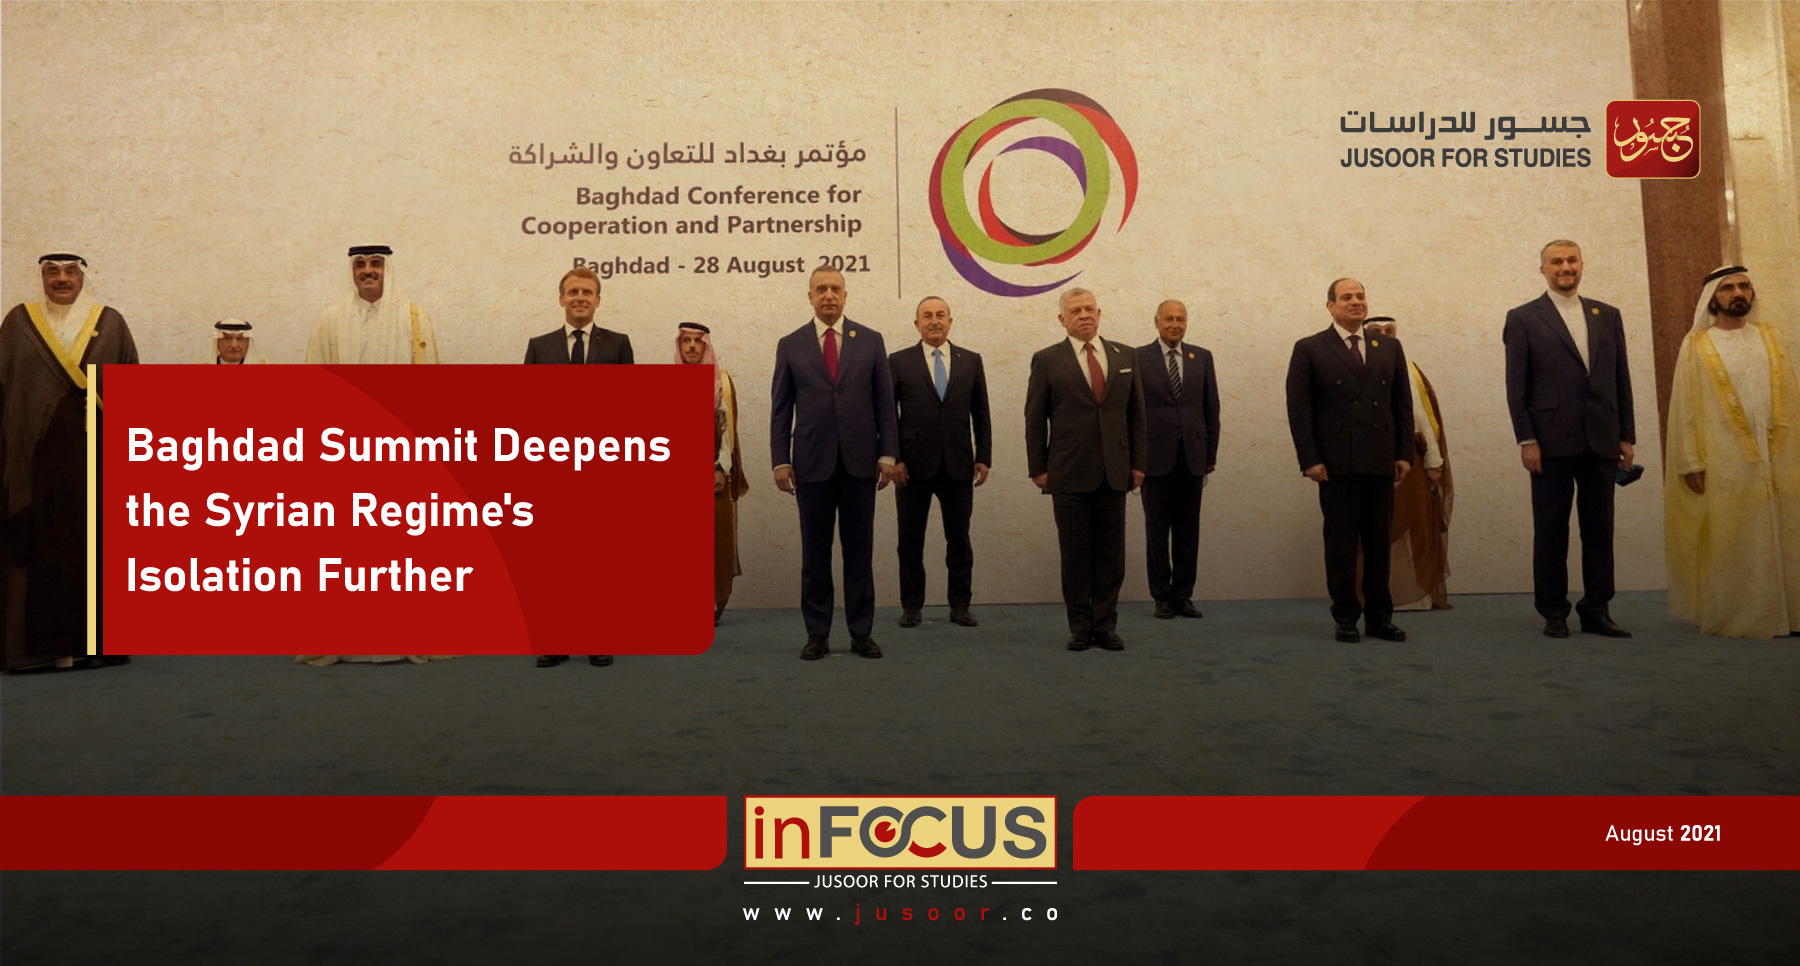 Baghdad Summit Deepens the Syrian Regime's Isolation Further